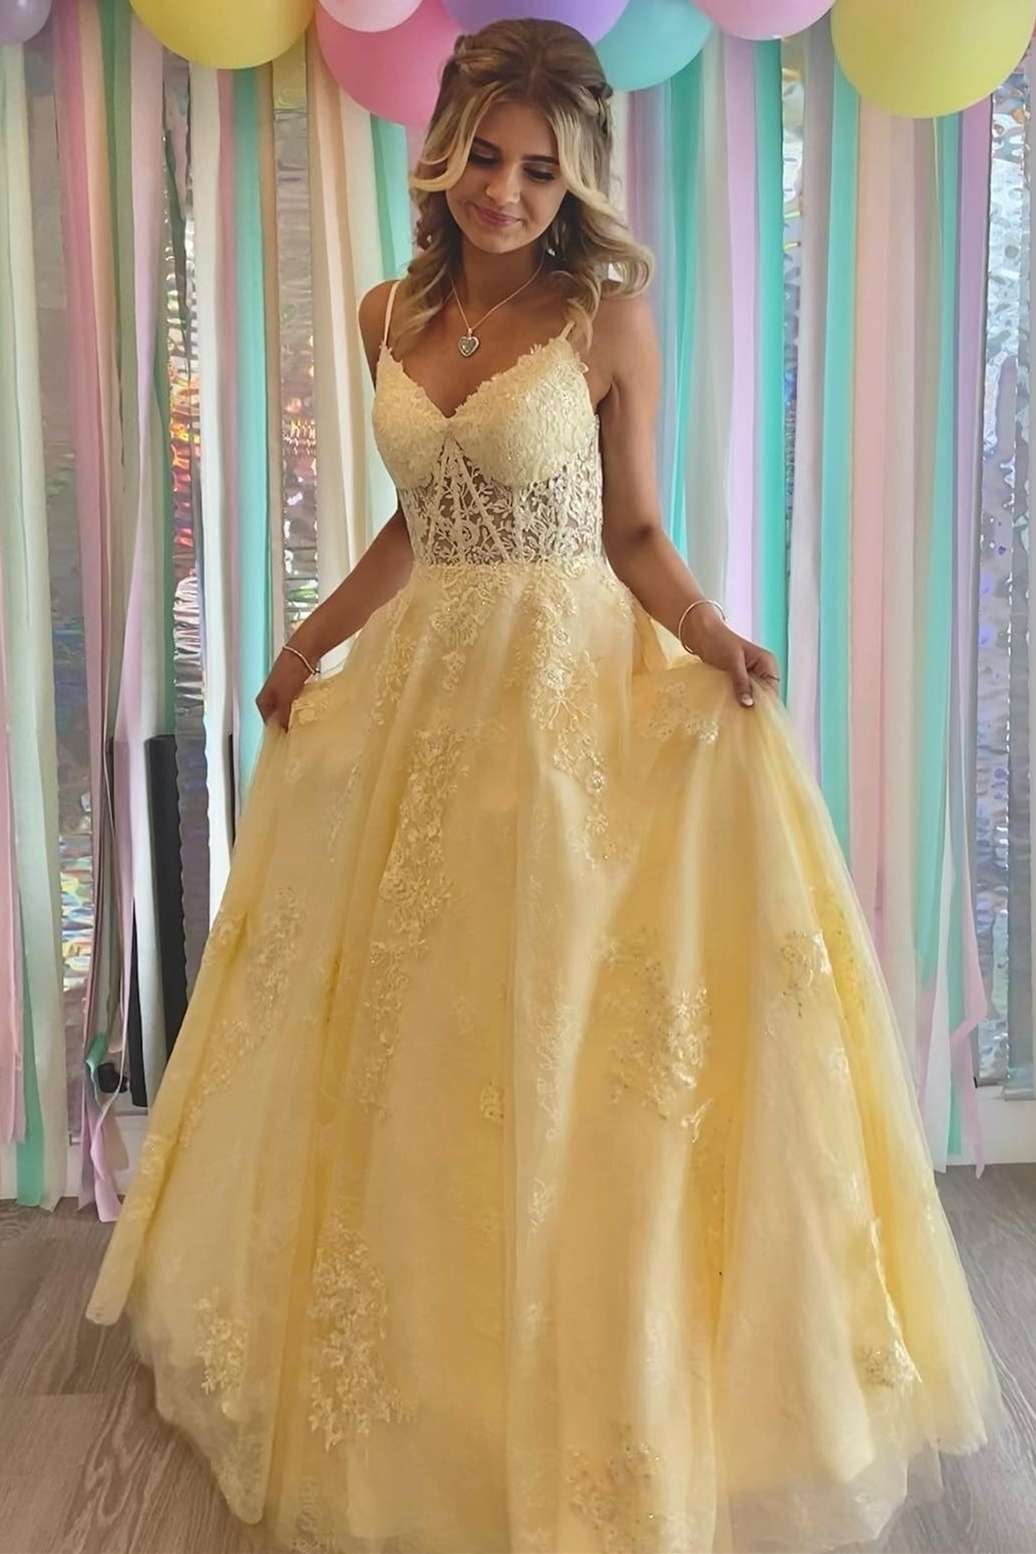 dressimeDressime A Line Princess V-Neck Tulle Long Prom Dress With Appliques 